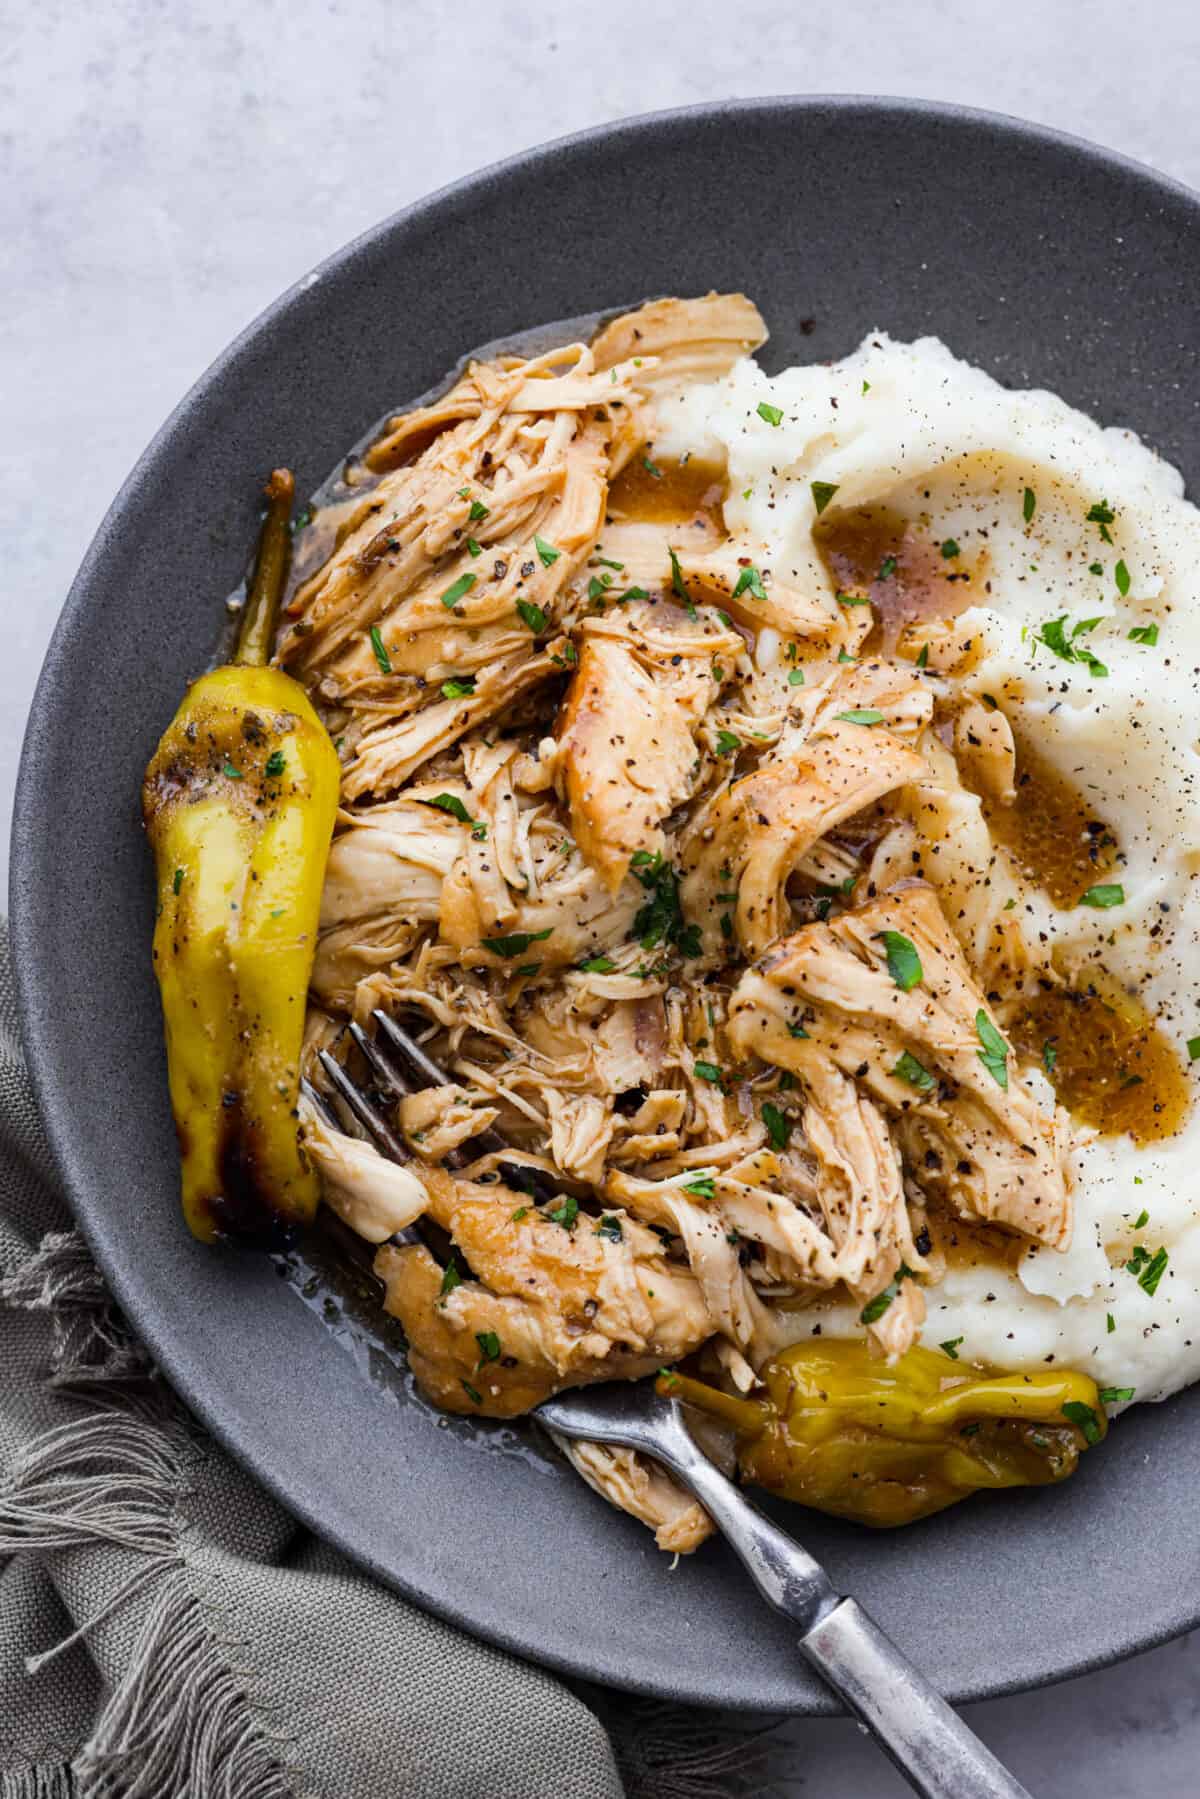 Shredded chicken served on a gray plate with mashed potatoes.